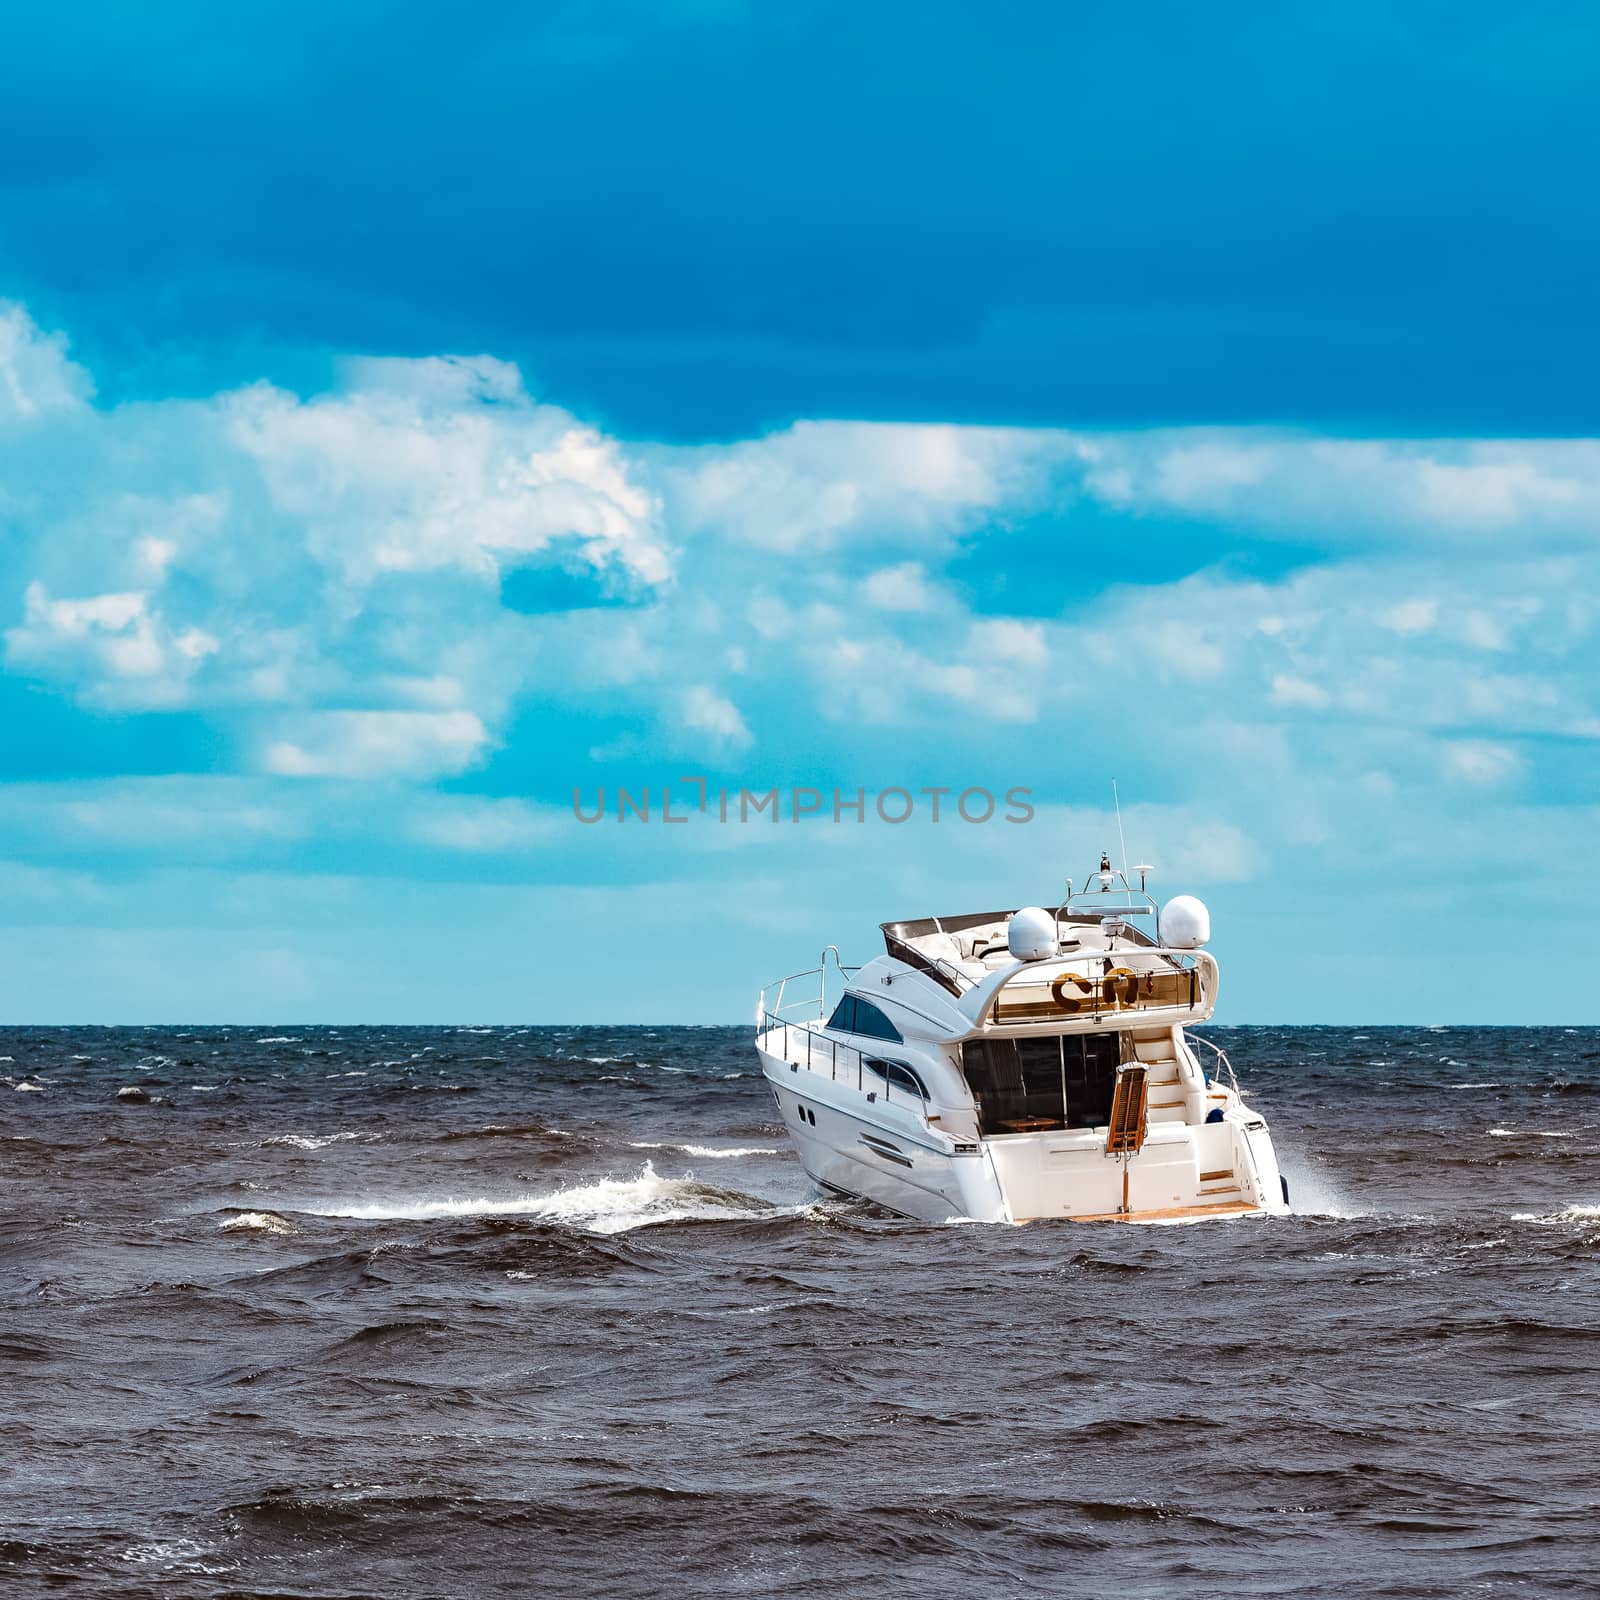 White speed boat in action by sengnsp